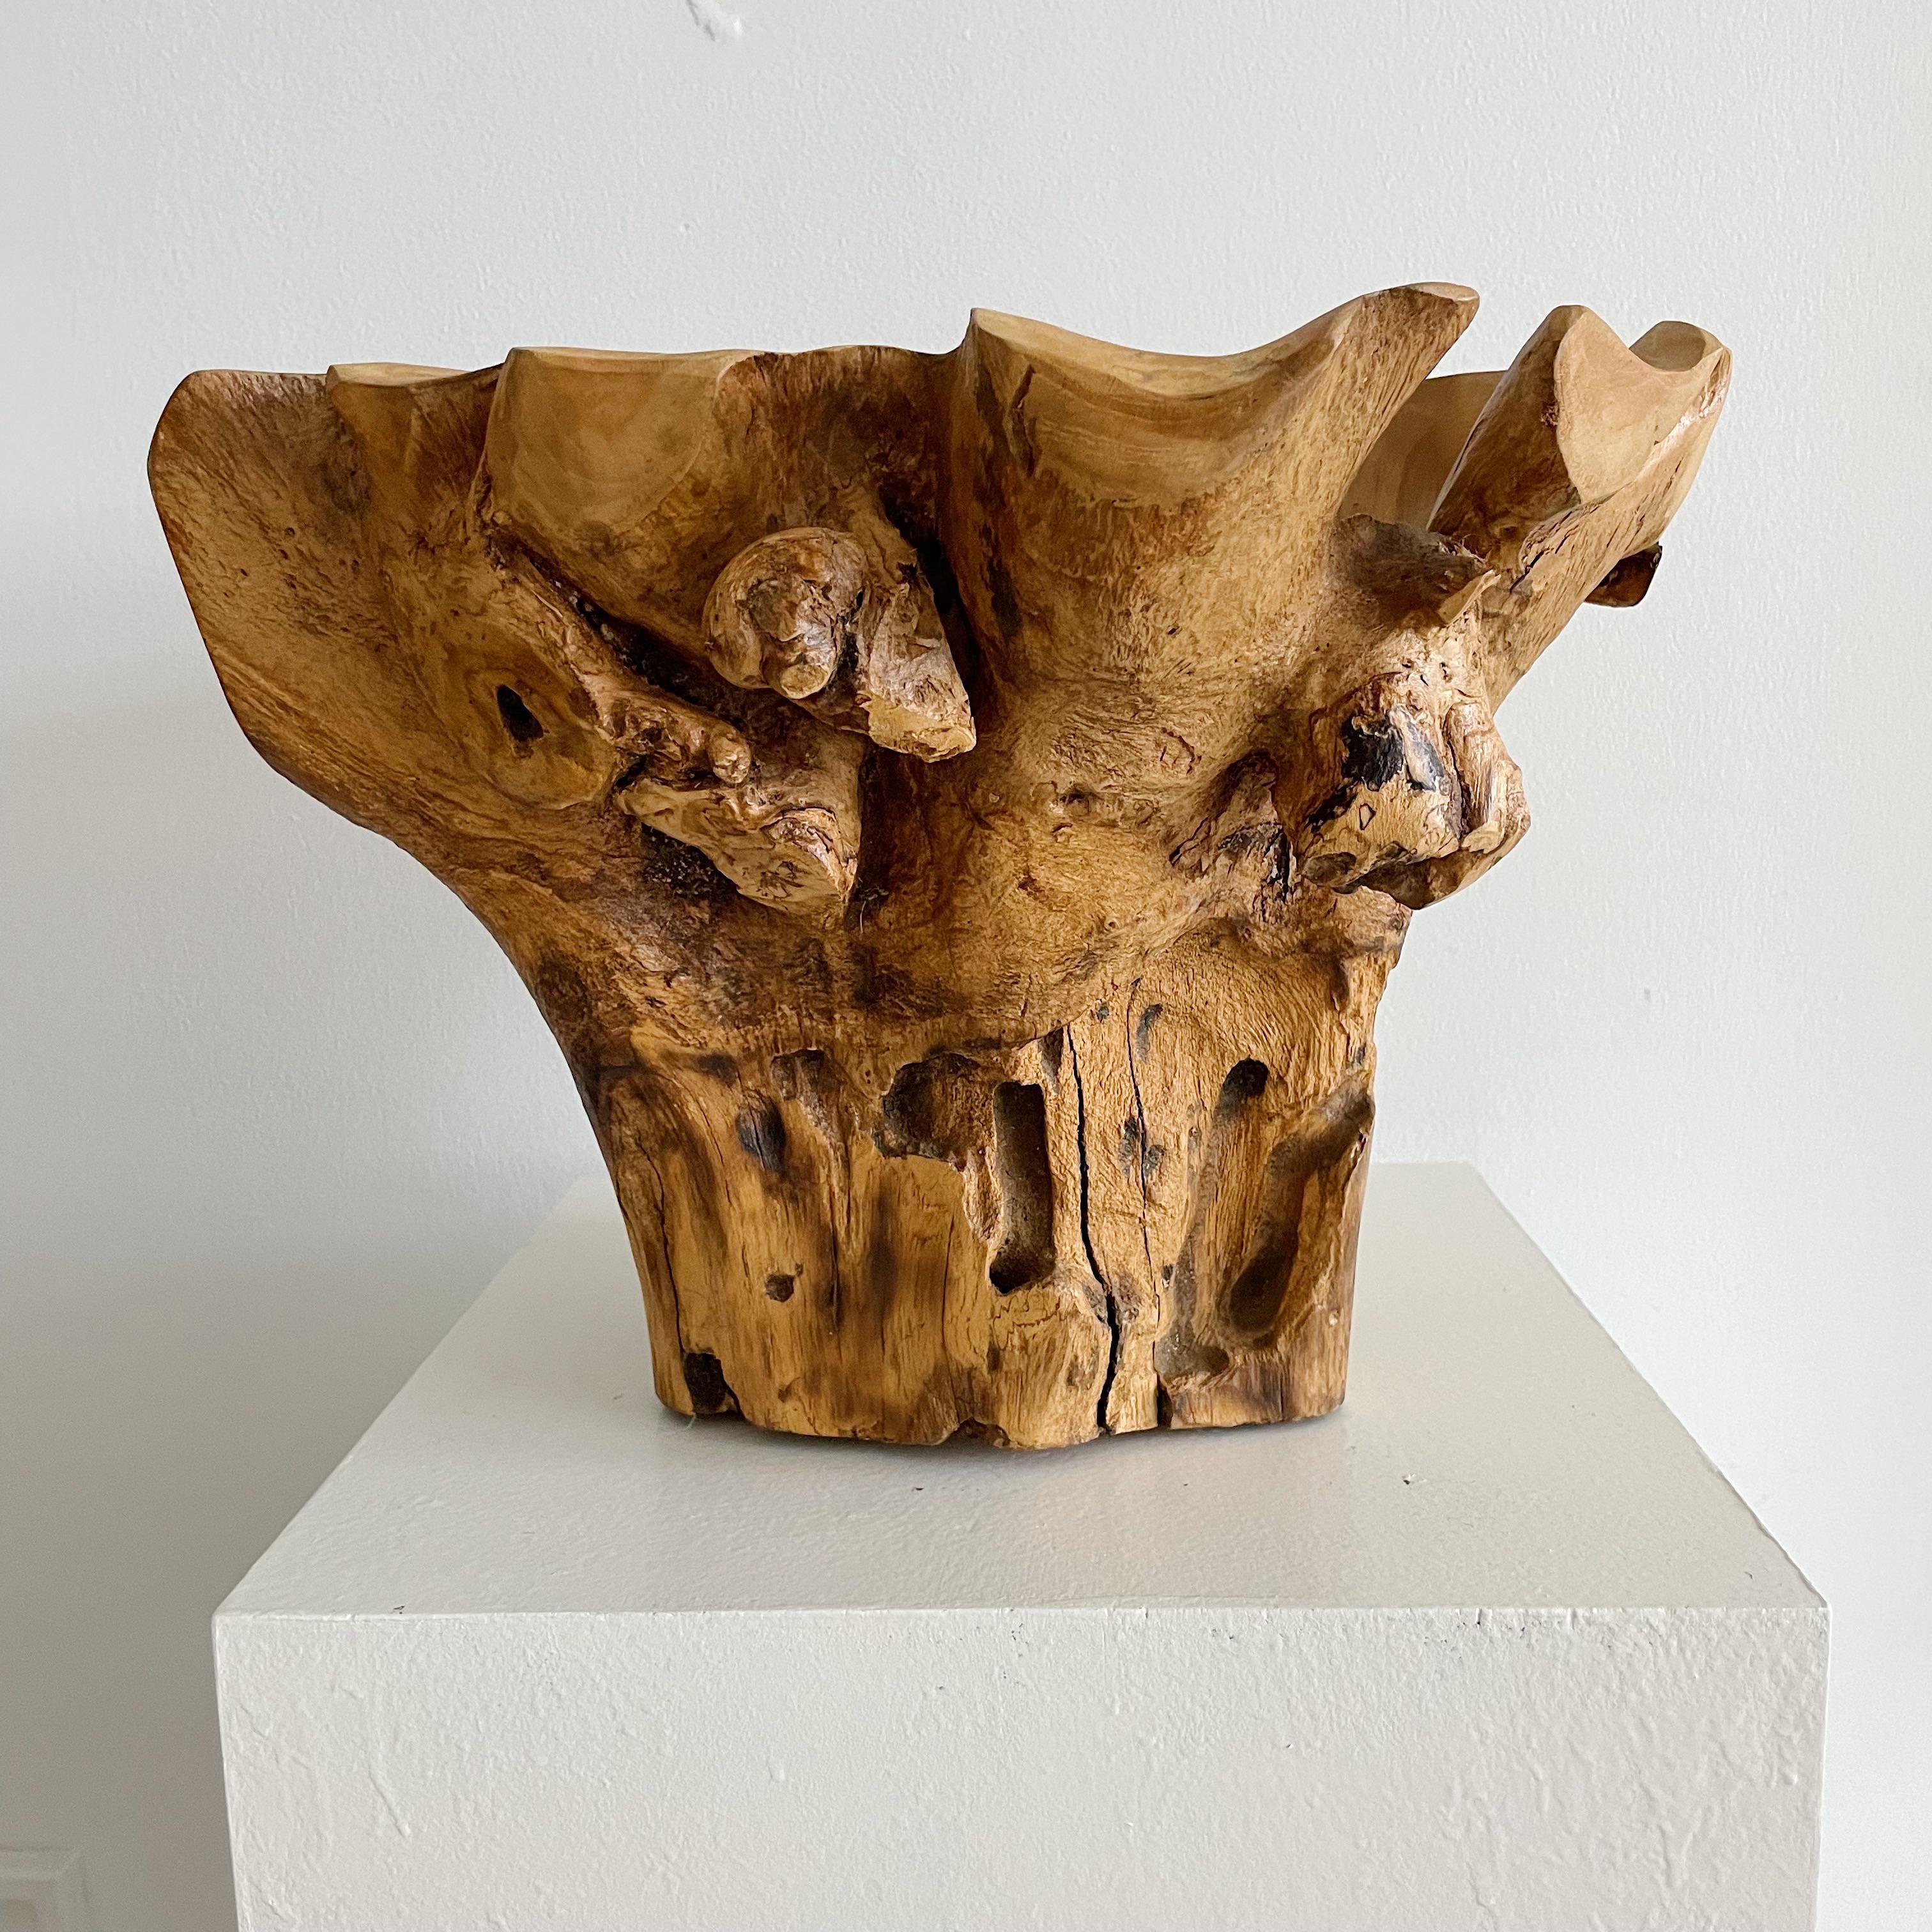 American Sculptural Organic Wood Centerpiece Bowl For Sale